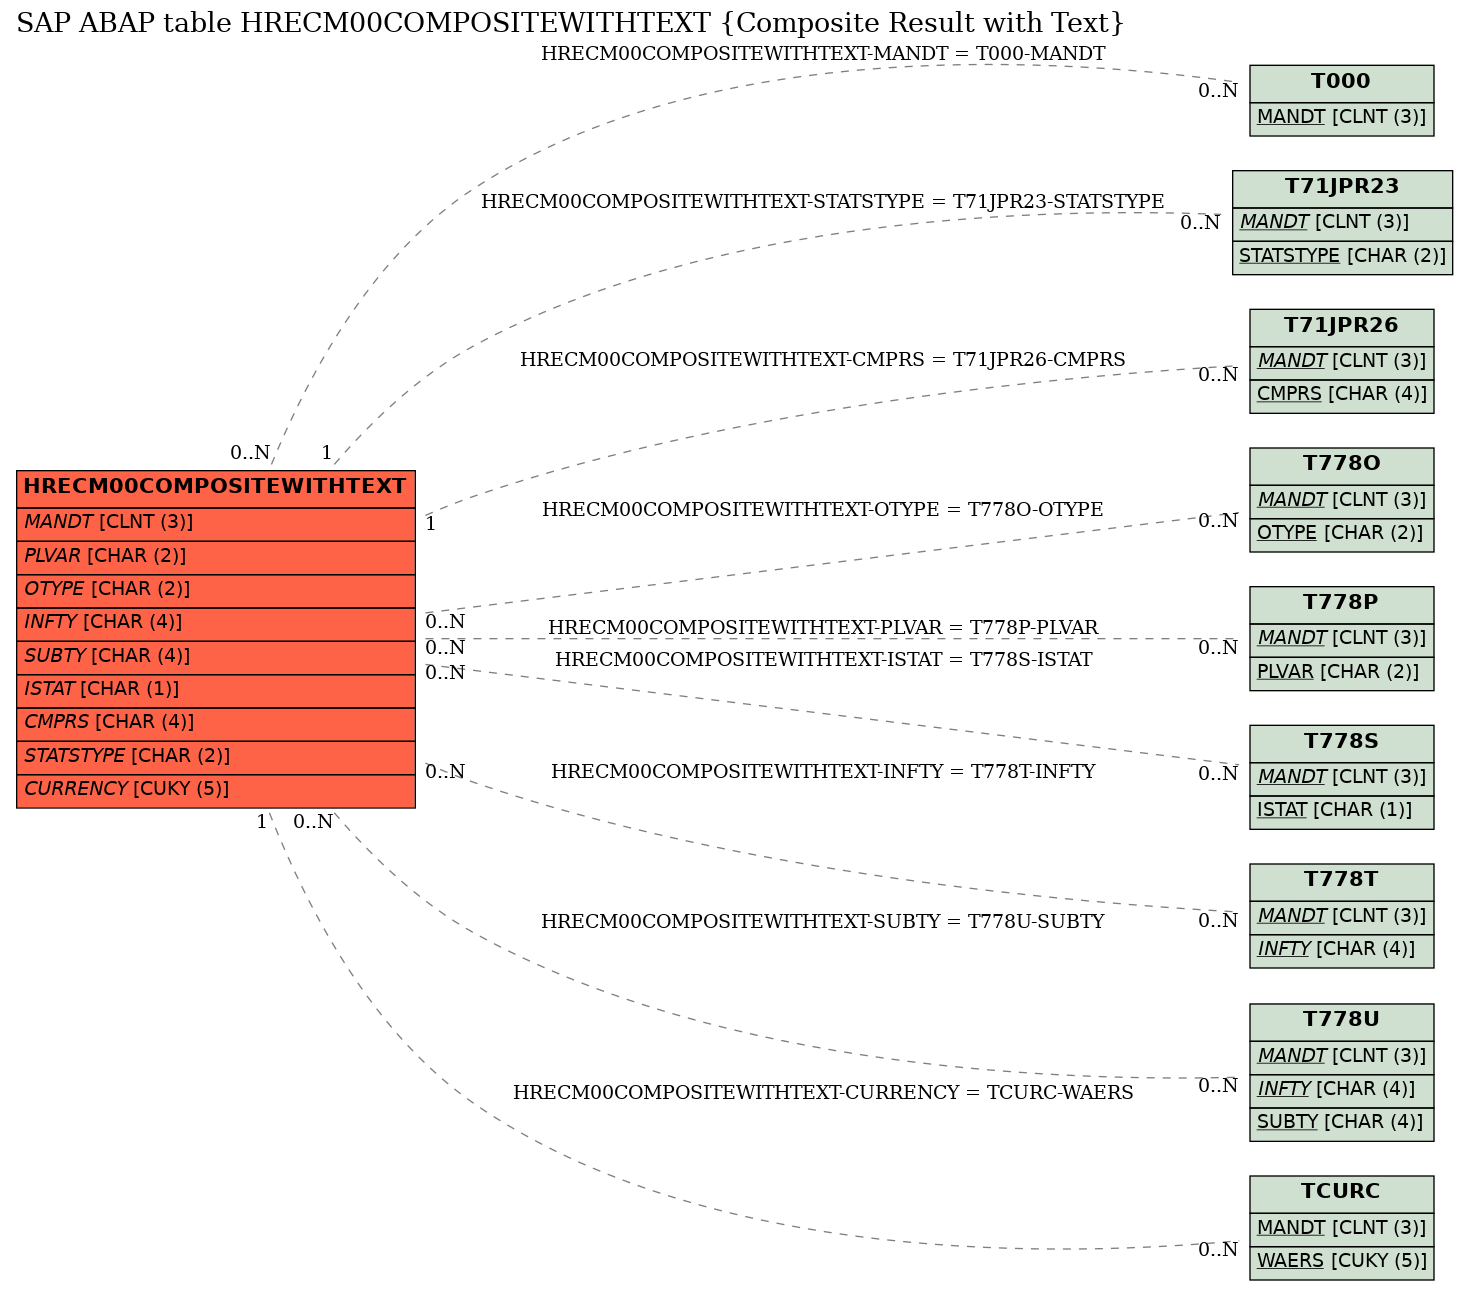 E-R Diagram for table HRECM00COMPOSITEWITHTEXT (Composite Result with Text)